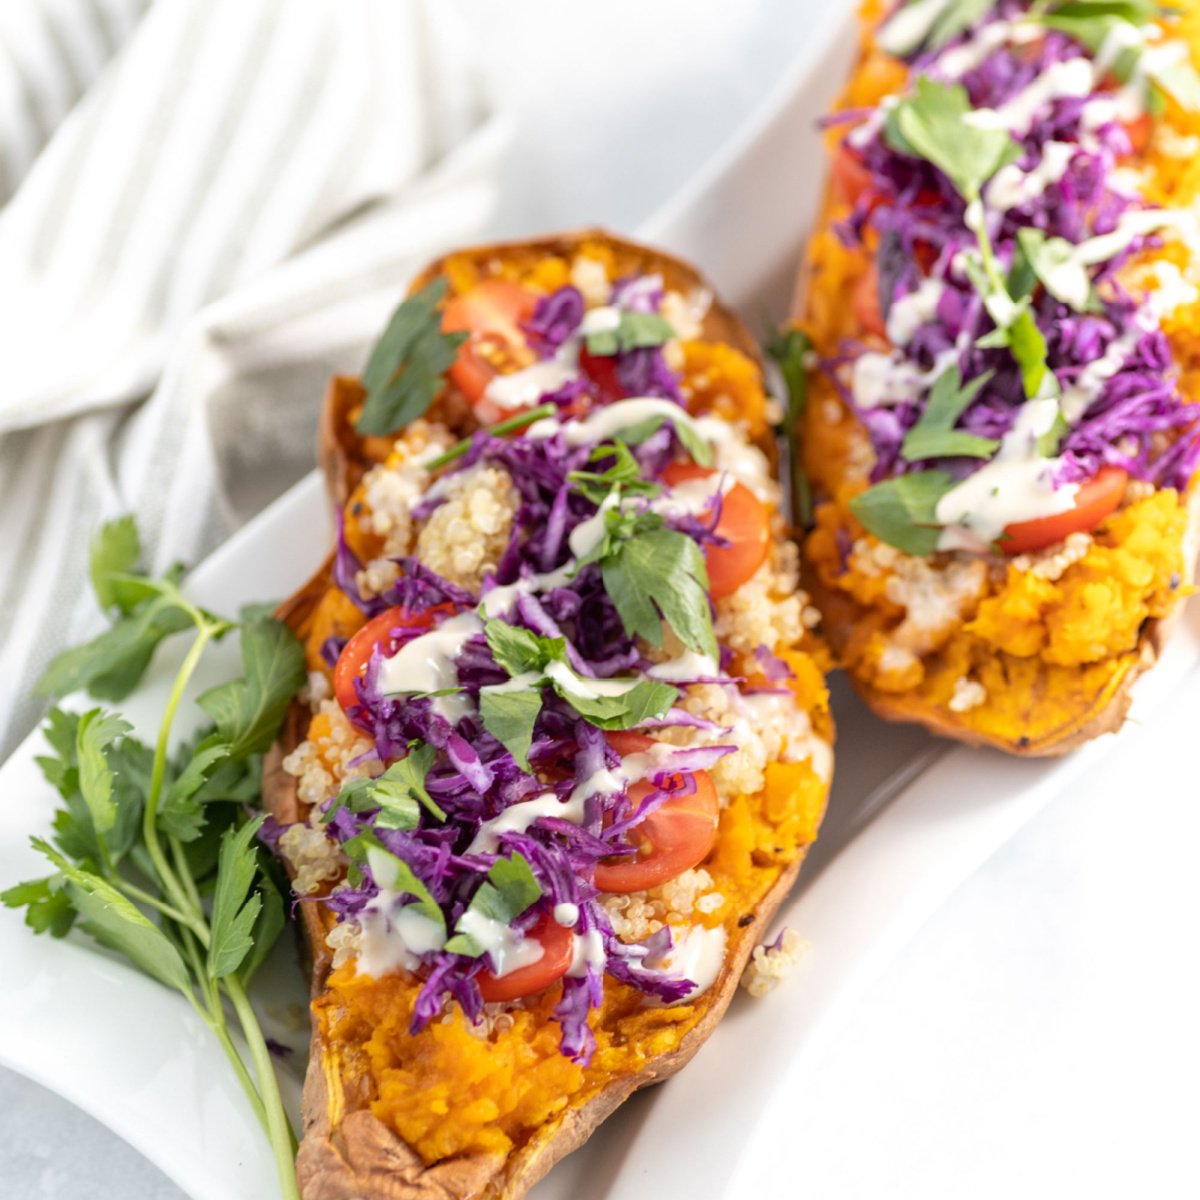 oven roasted sweet potatoes stuffed with a quinoa and cabbage salad